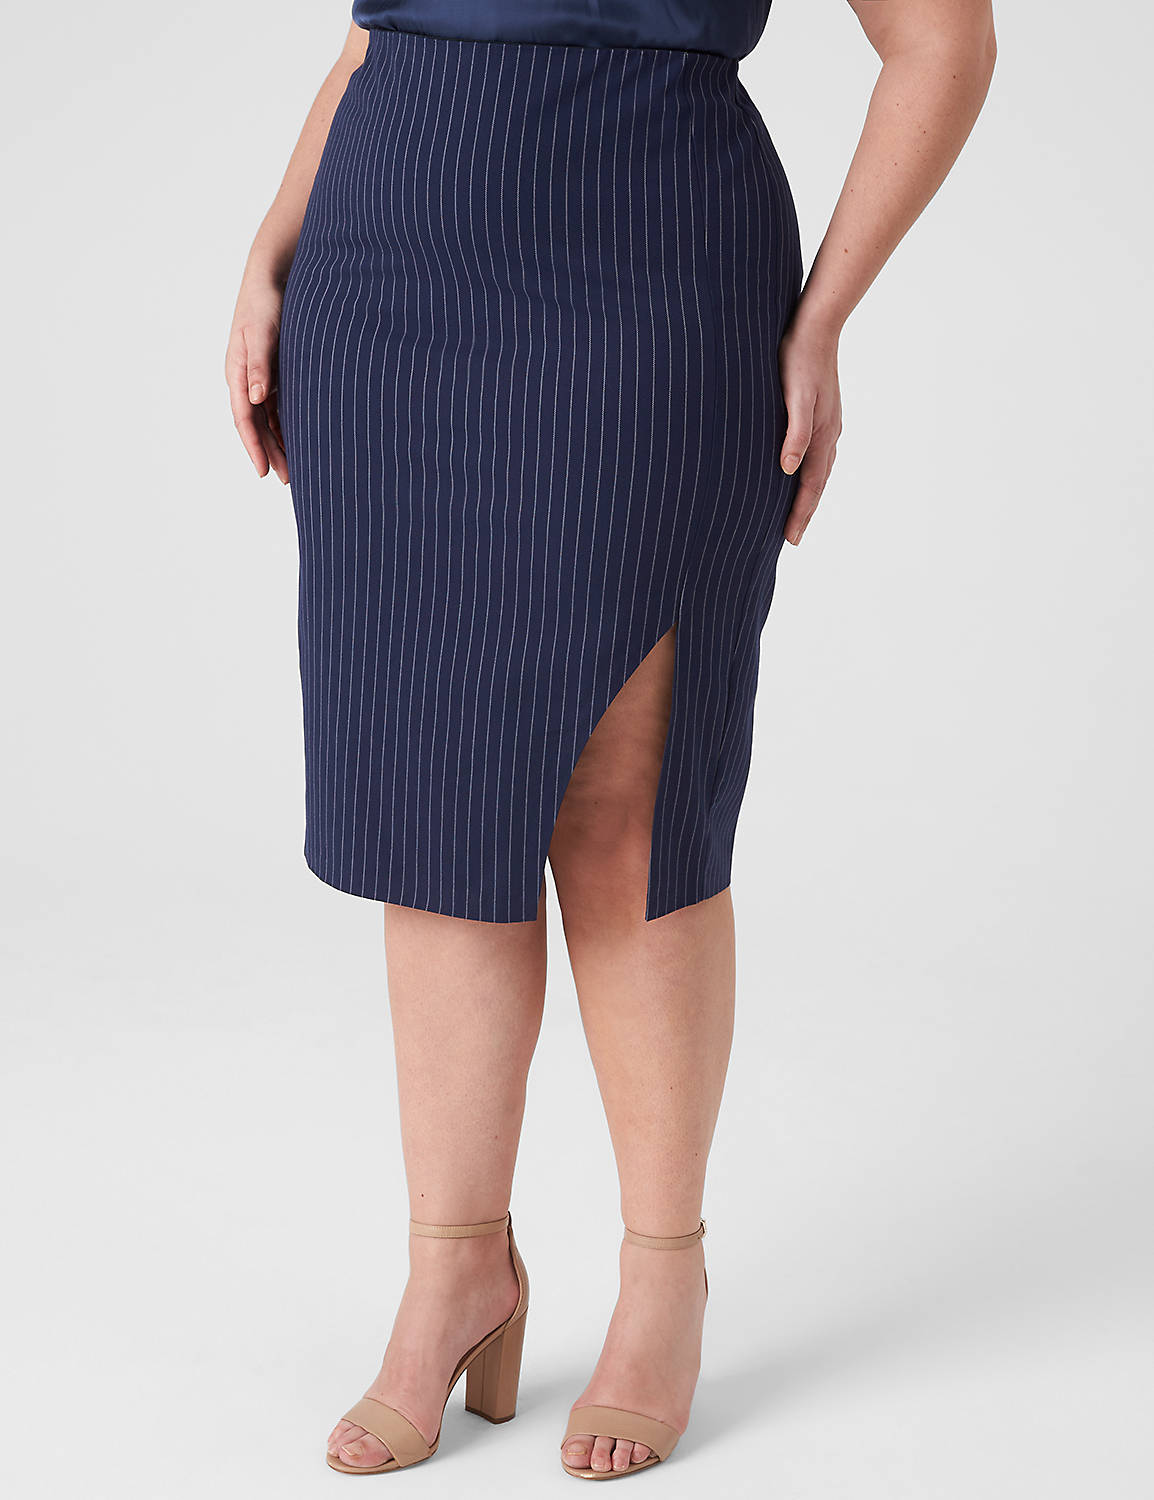 Pinstriped Bodycon with Belt 113587 Product Image 1